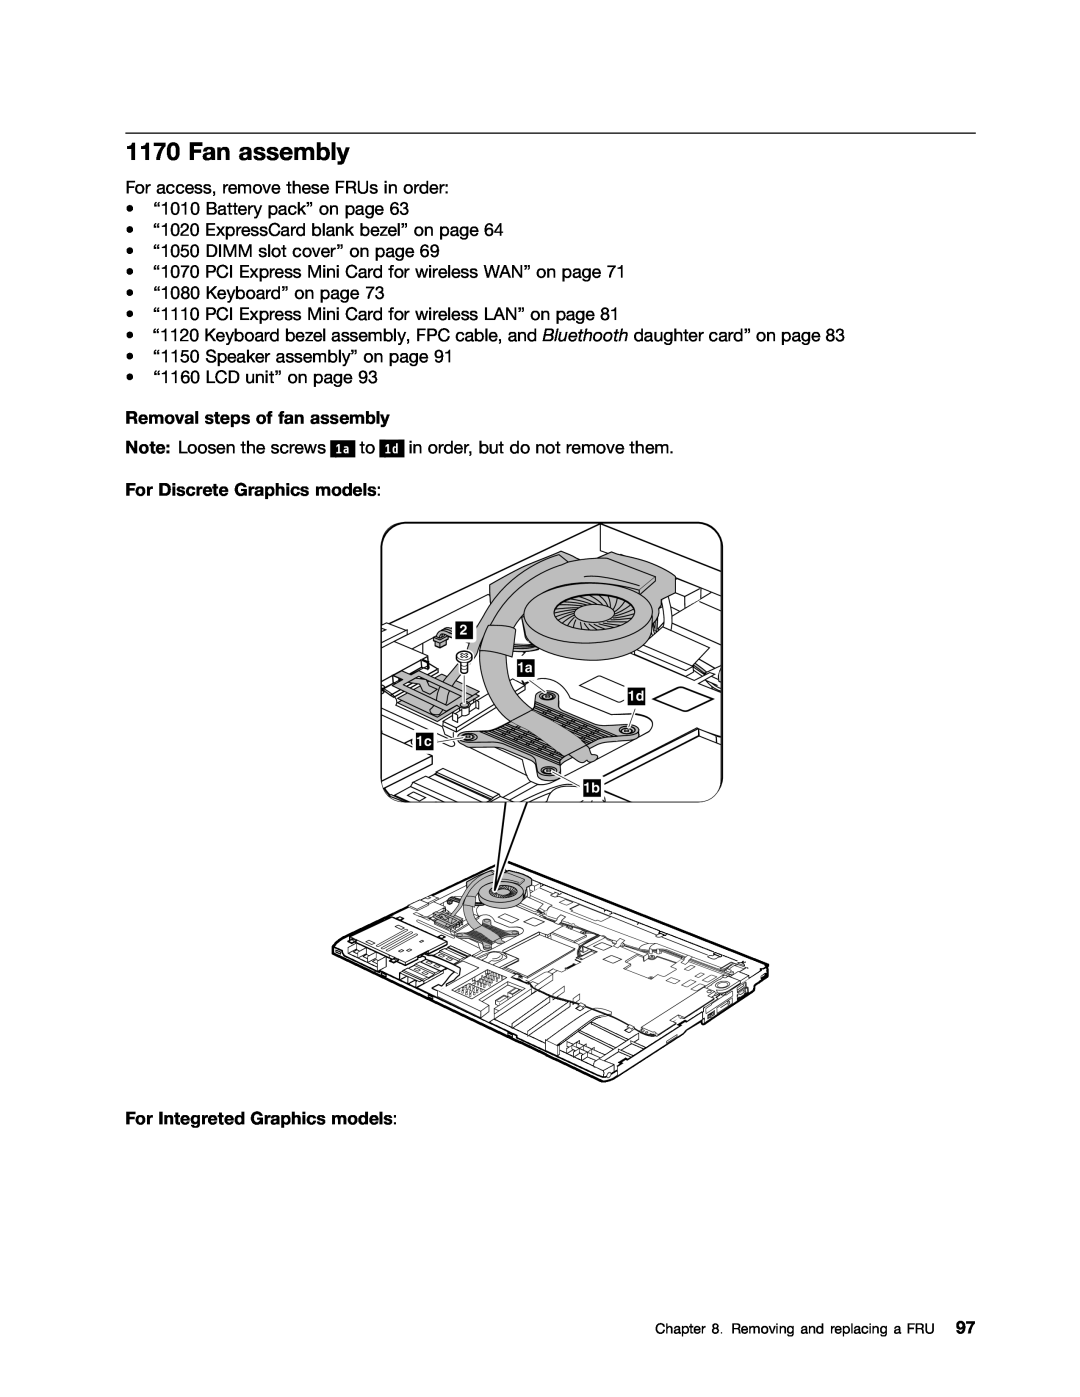 Lenovo T420i Fan assembly, Removal steps of fan assembly, For Discrete Graphics models, For Integreted Graphics models 